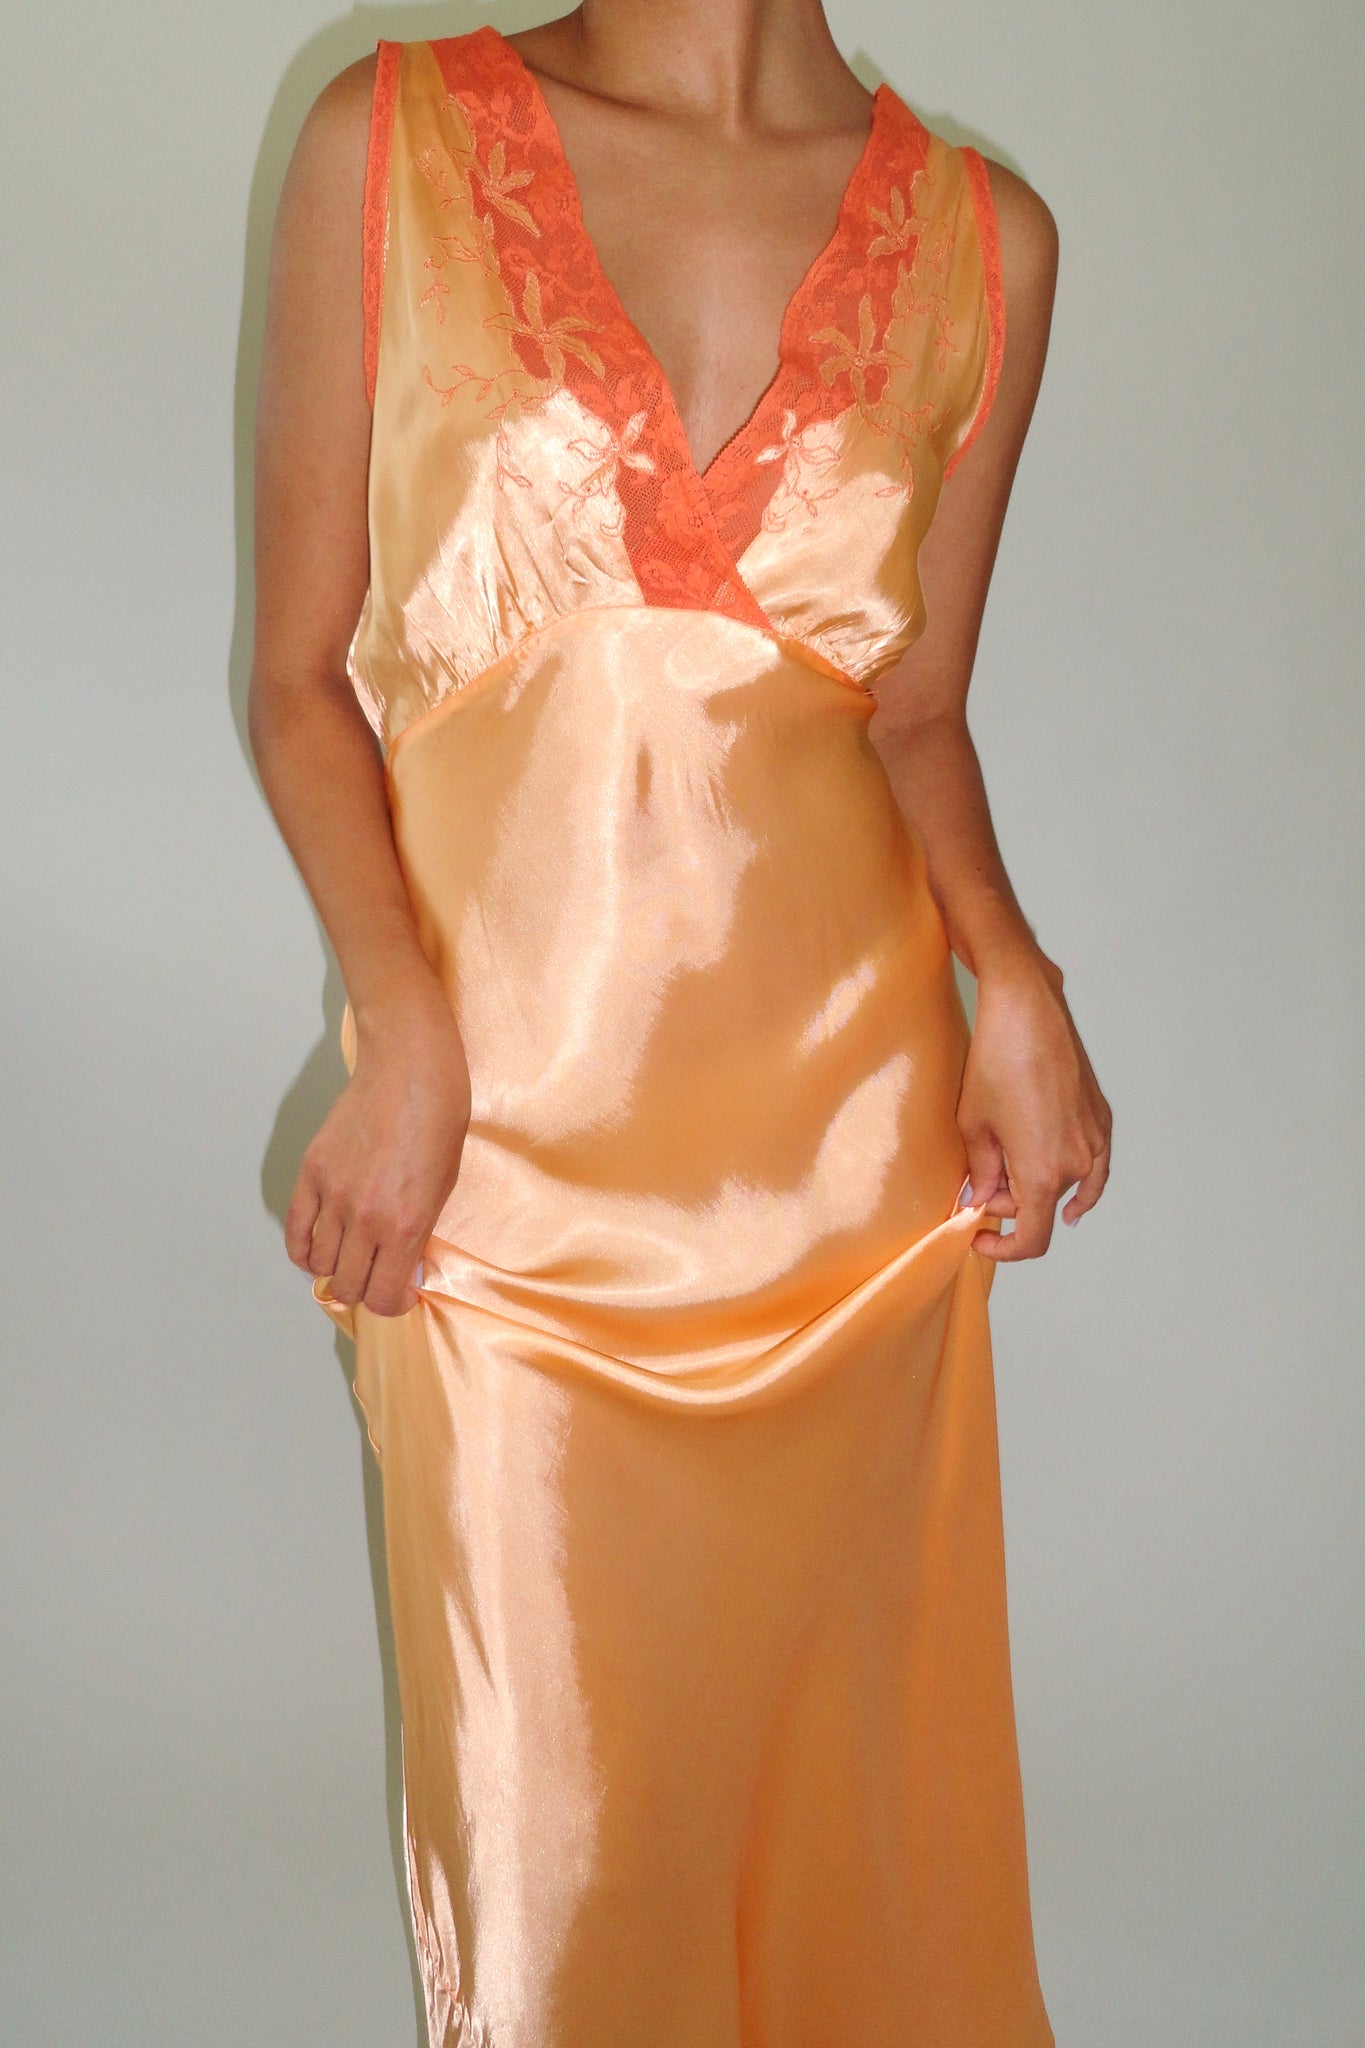 1940s Hand Dyed Orange Lace Nightgown